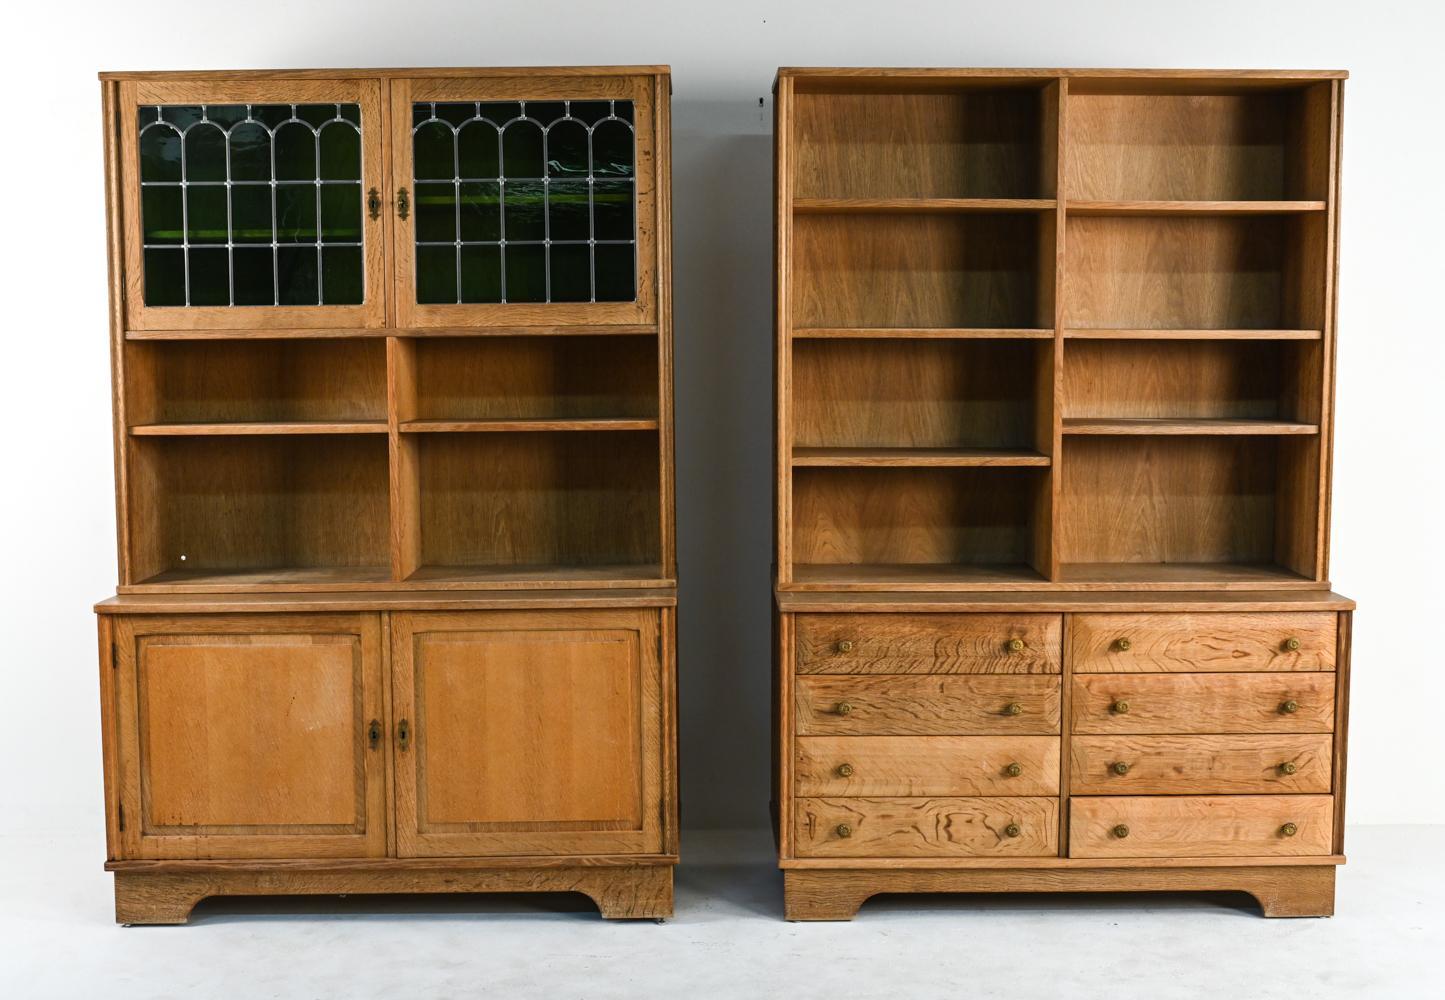 Two gorgeous Danish mid-century farmhouse provincial-style cabinets, each in two-part construction for easier transport. One with bookcase shelves above two sets of drawers; the other with green tinted leaded glass doors and shelves above two